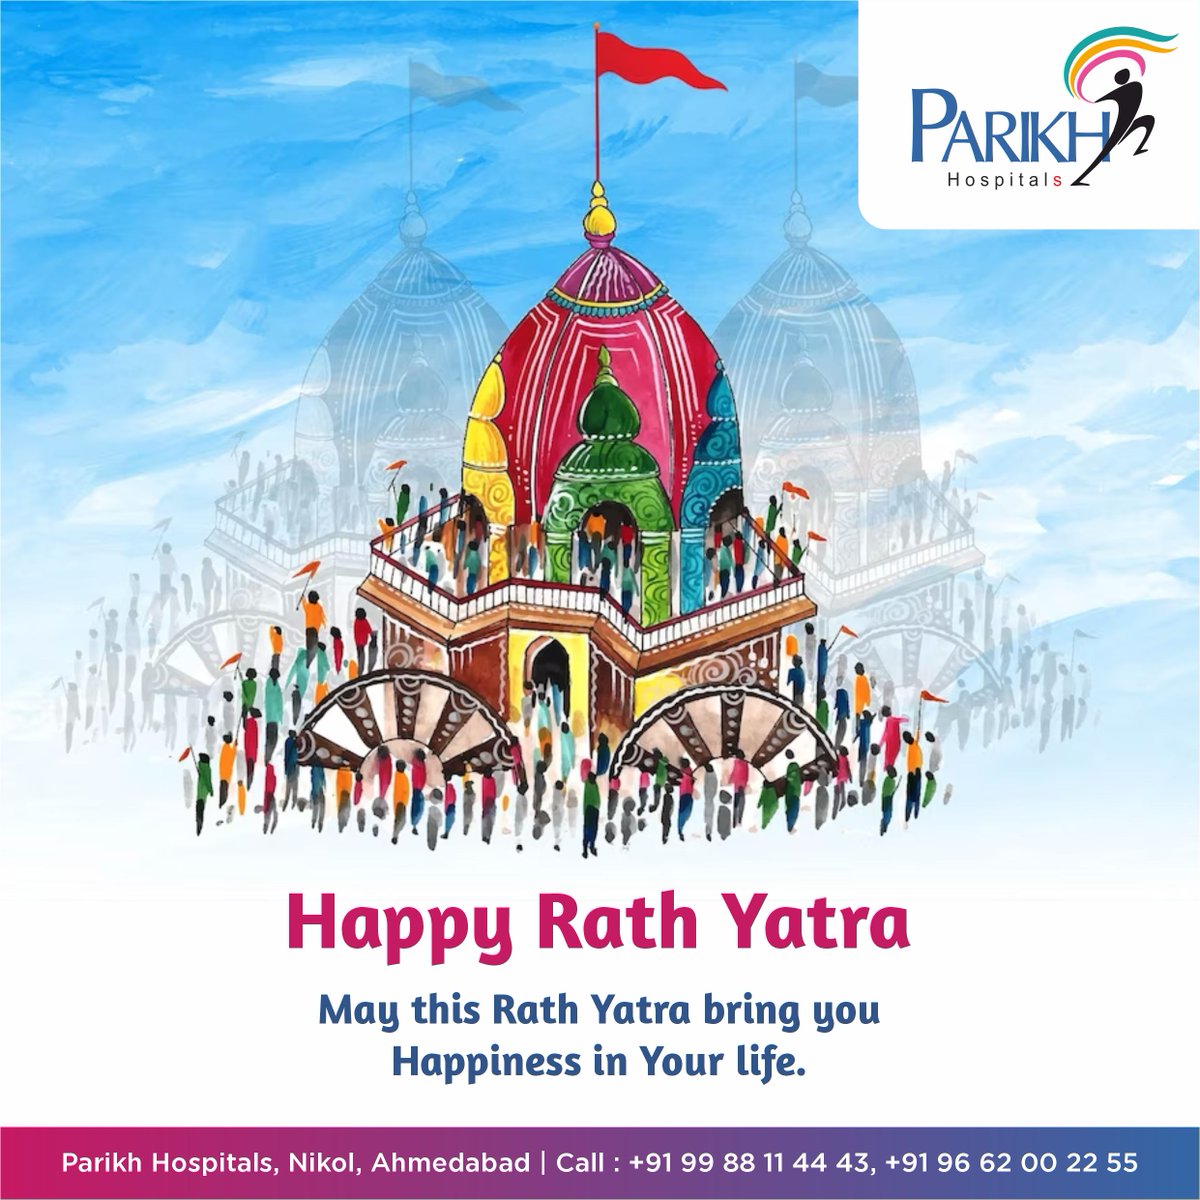 Jagannath Rath Yatra has a great significance in Hindu religion. This festival is dedicated to worship Lord Krishna along with elder brother Balbhadra and younger sister Subhadra. The celebration starts from Snana Purnima. #ParikhHospitals #Nikol #RathYatra2023